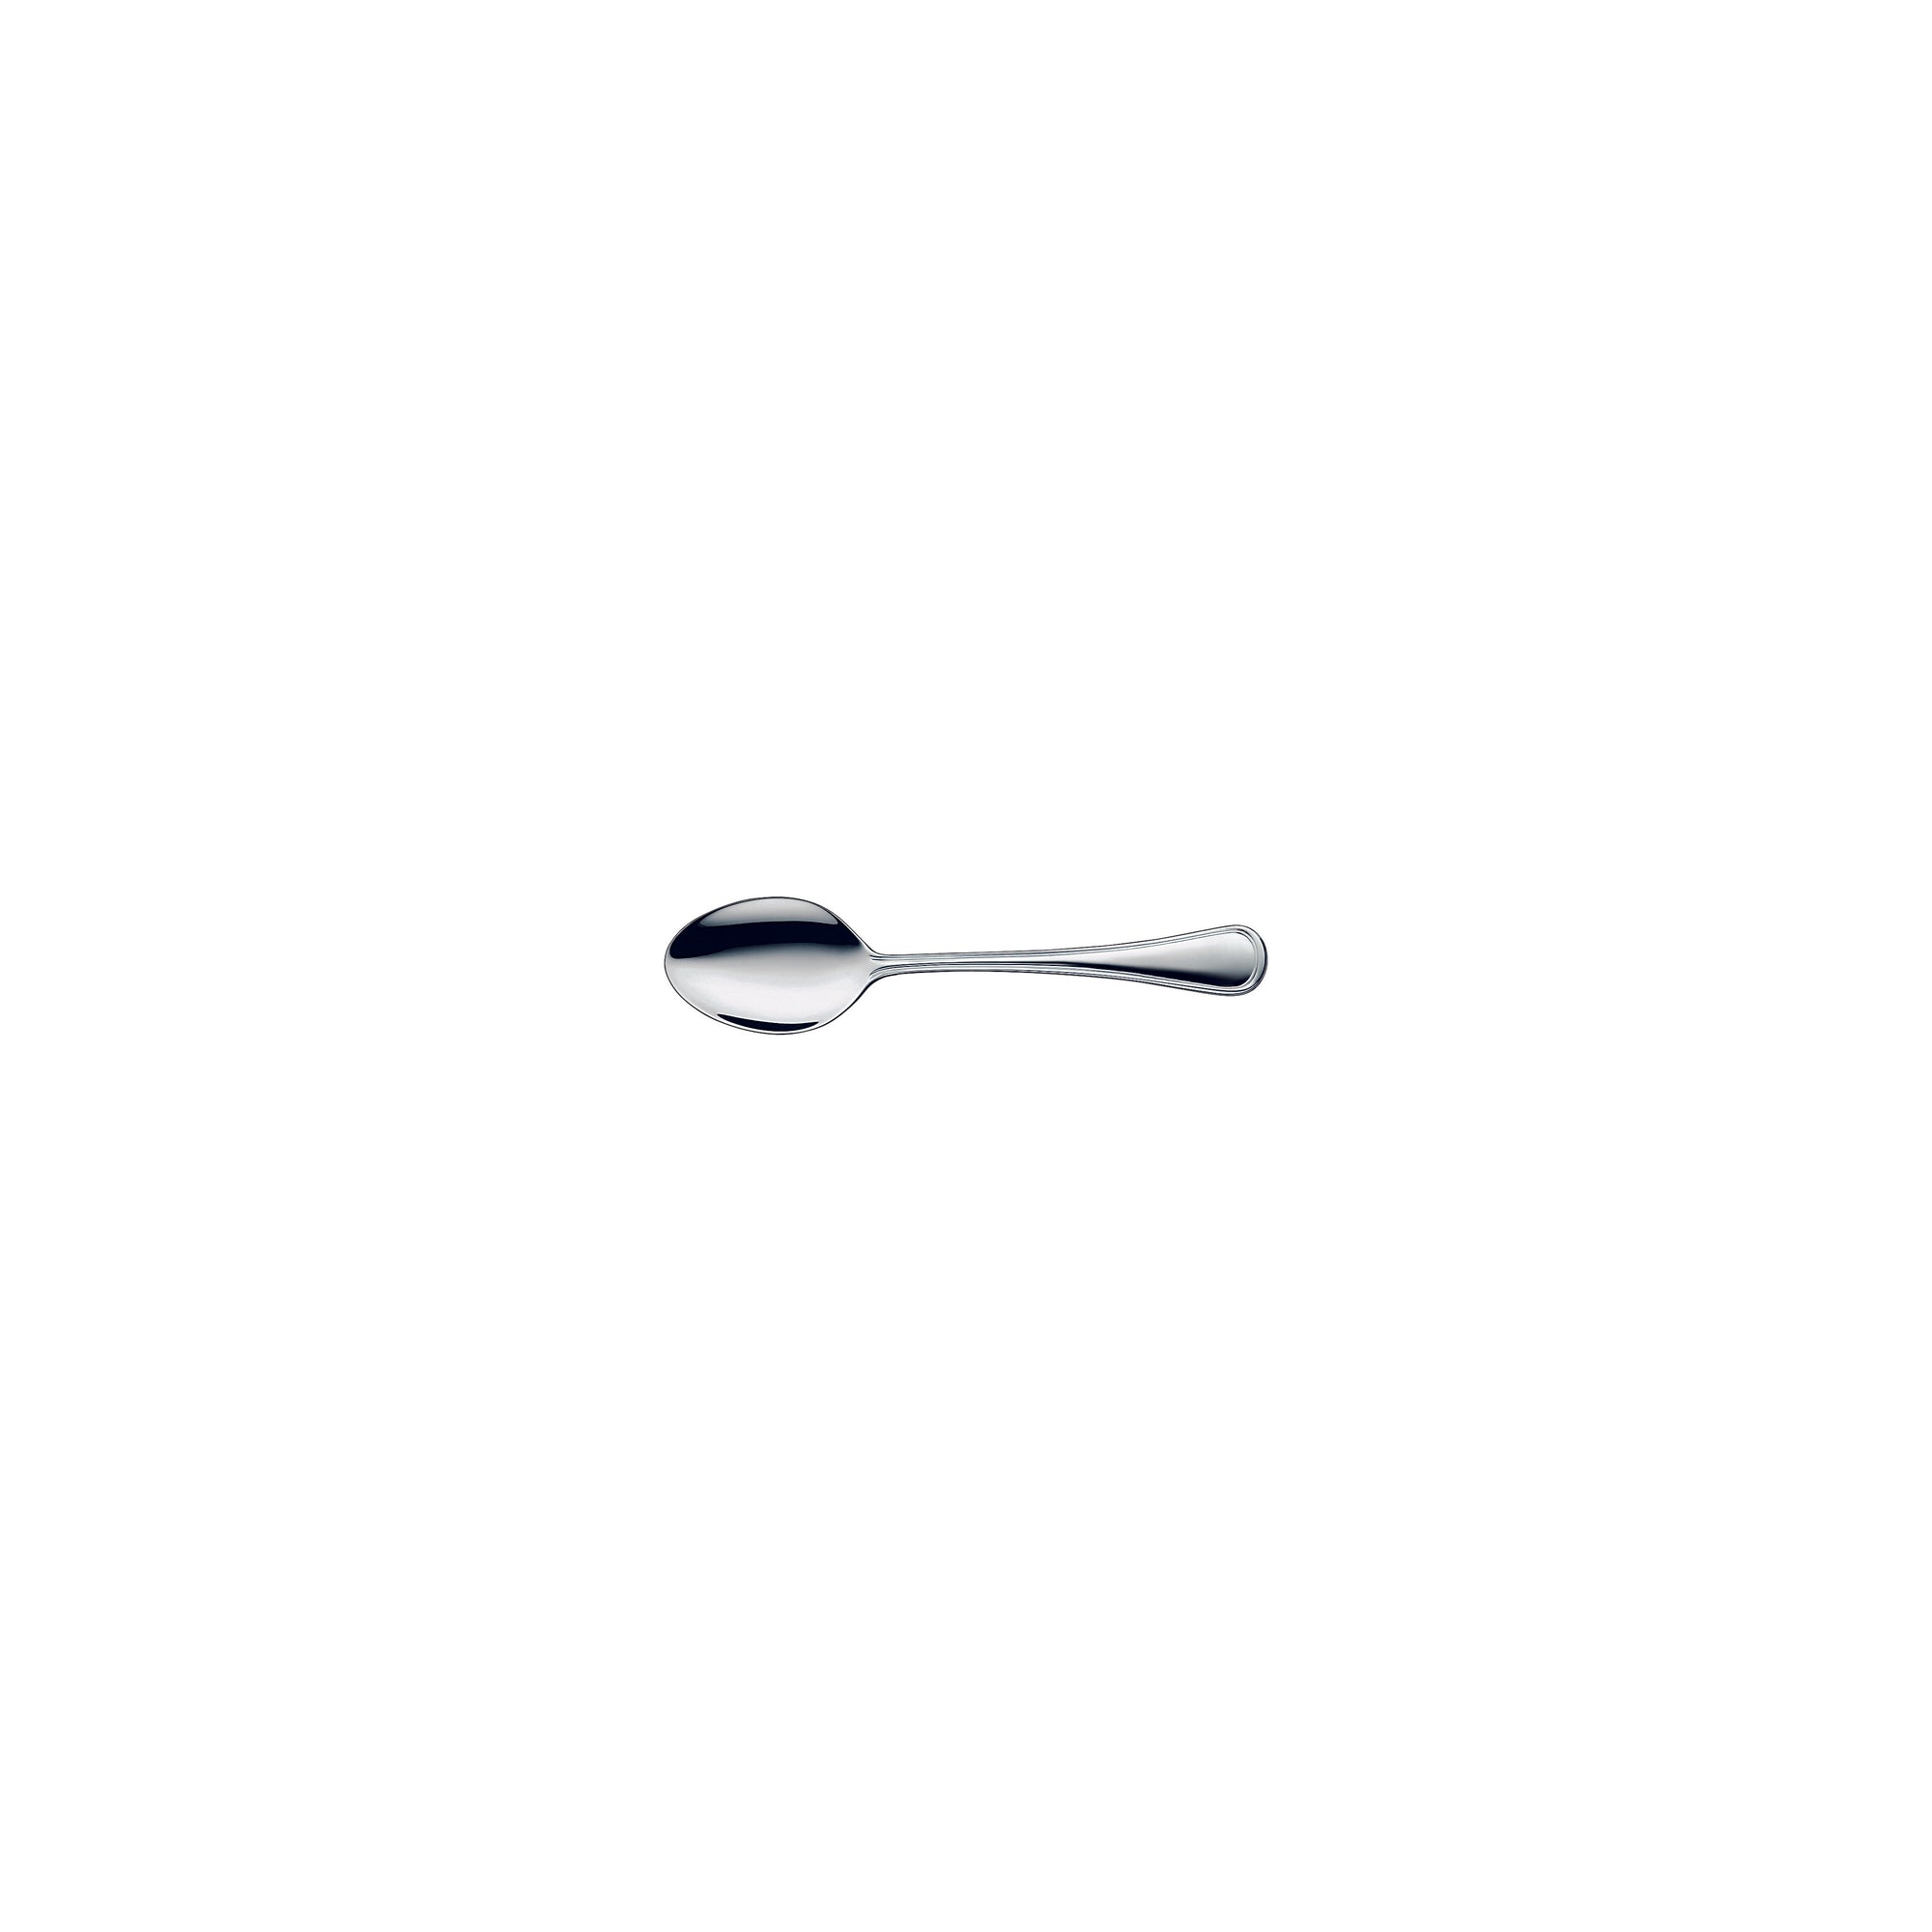 Contour Coffee Spoon Silverplated